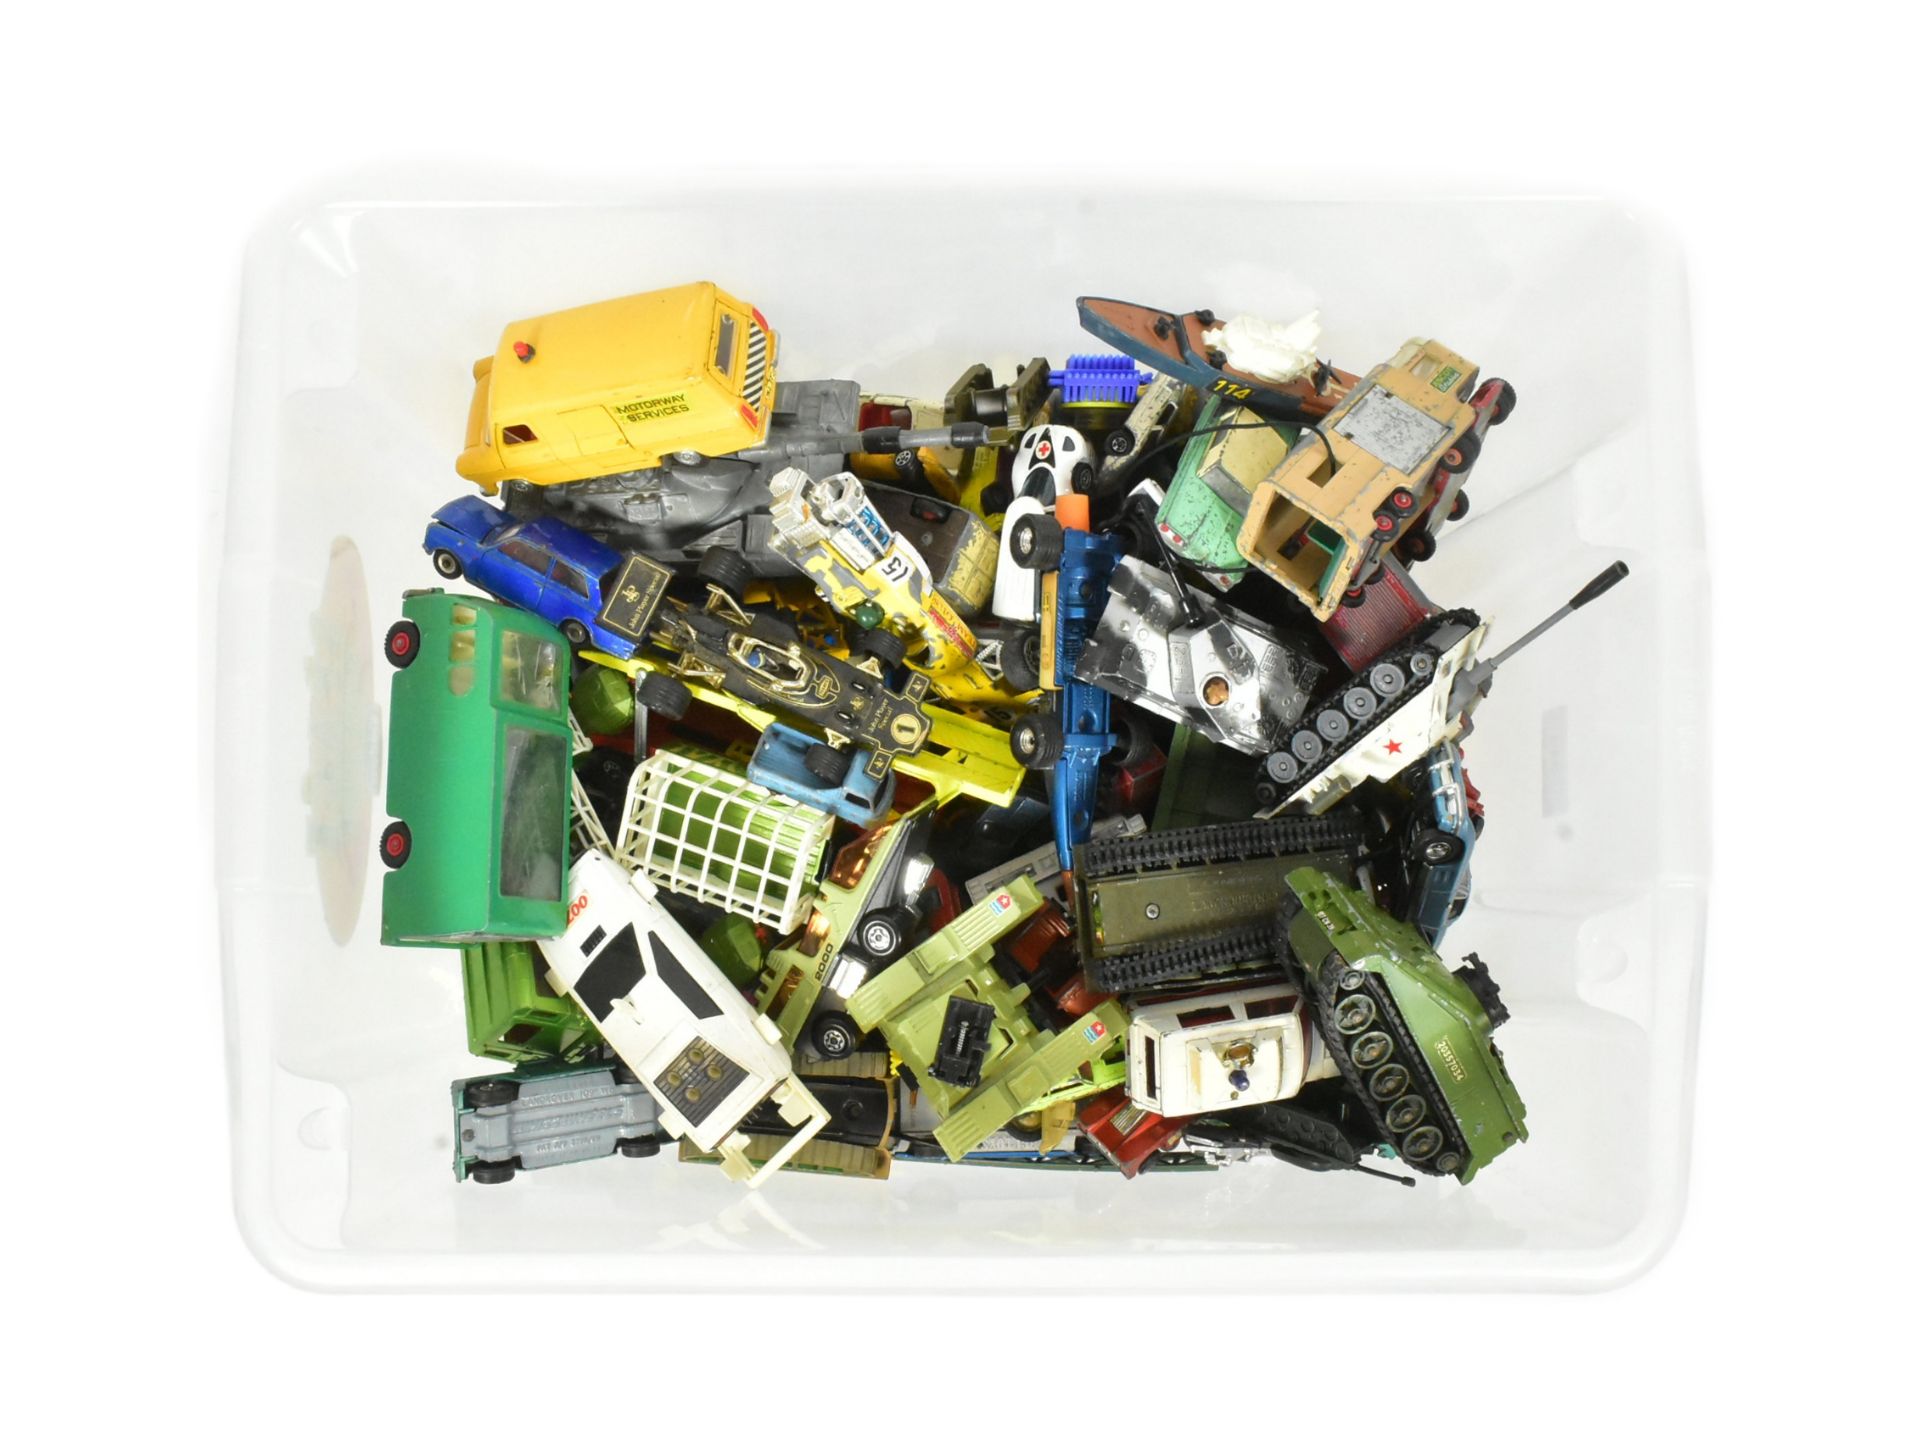 DIECAST - LARGE COLLECTION OF VINTAGE DIECAST MODELS